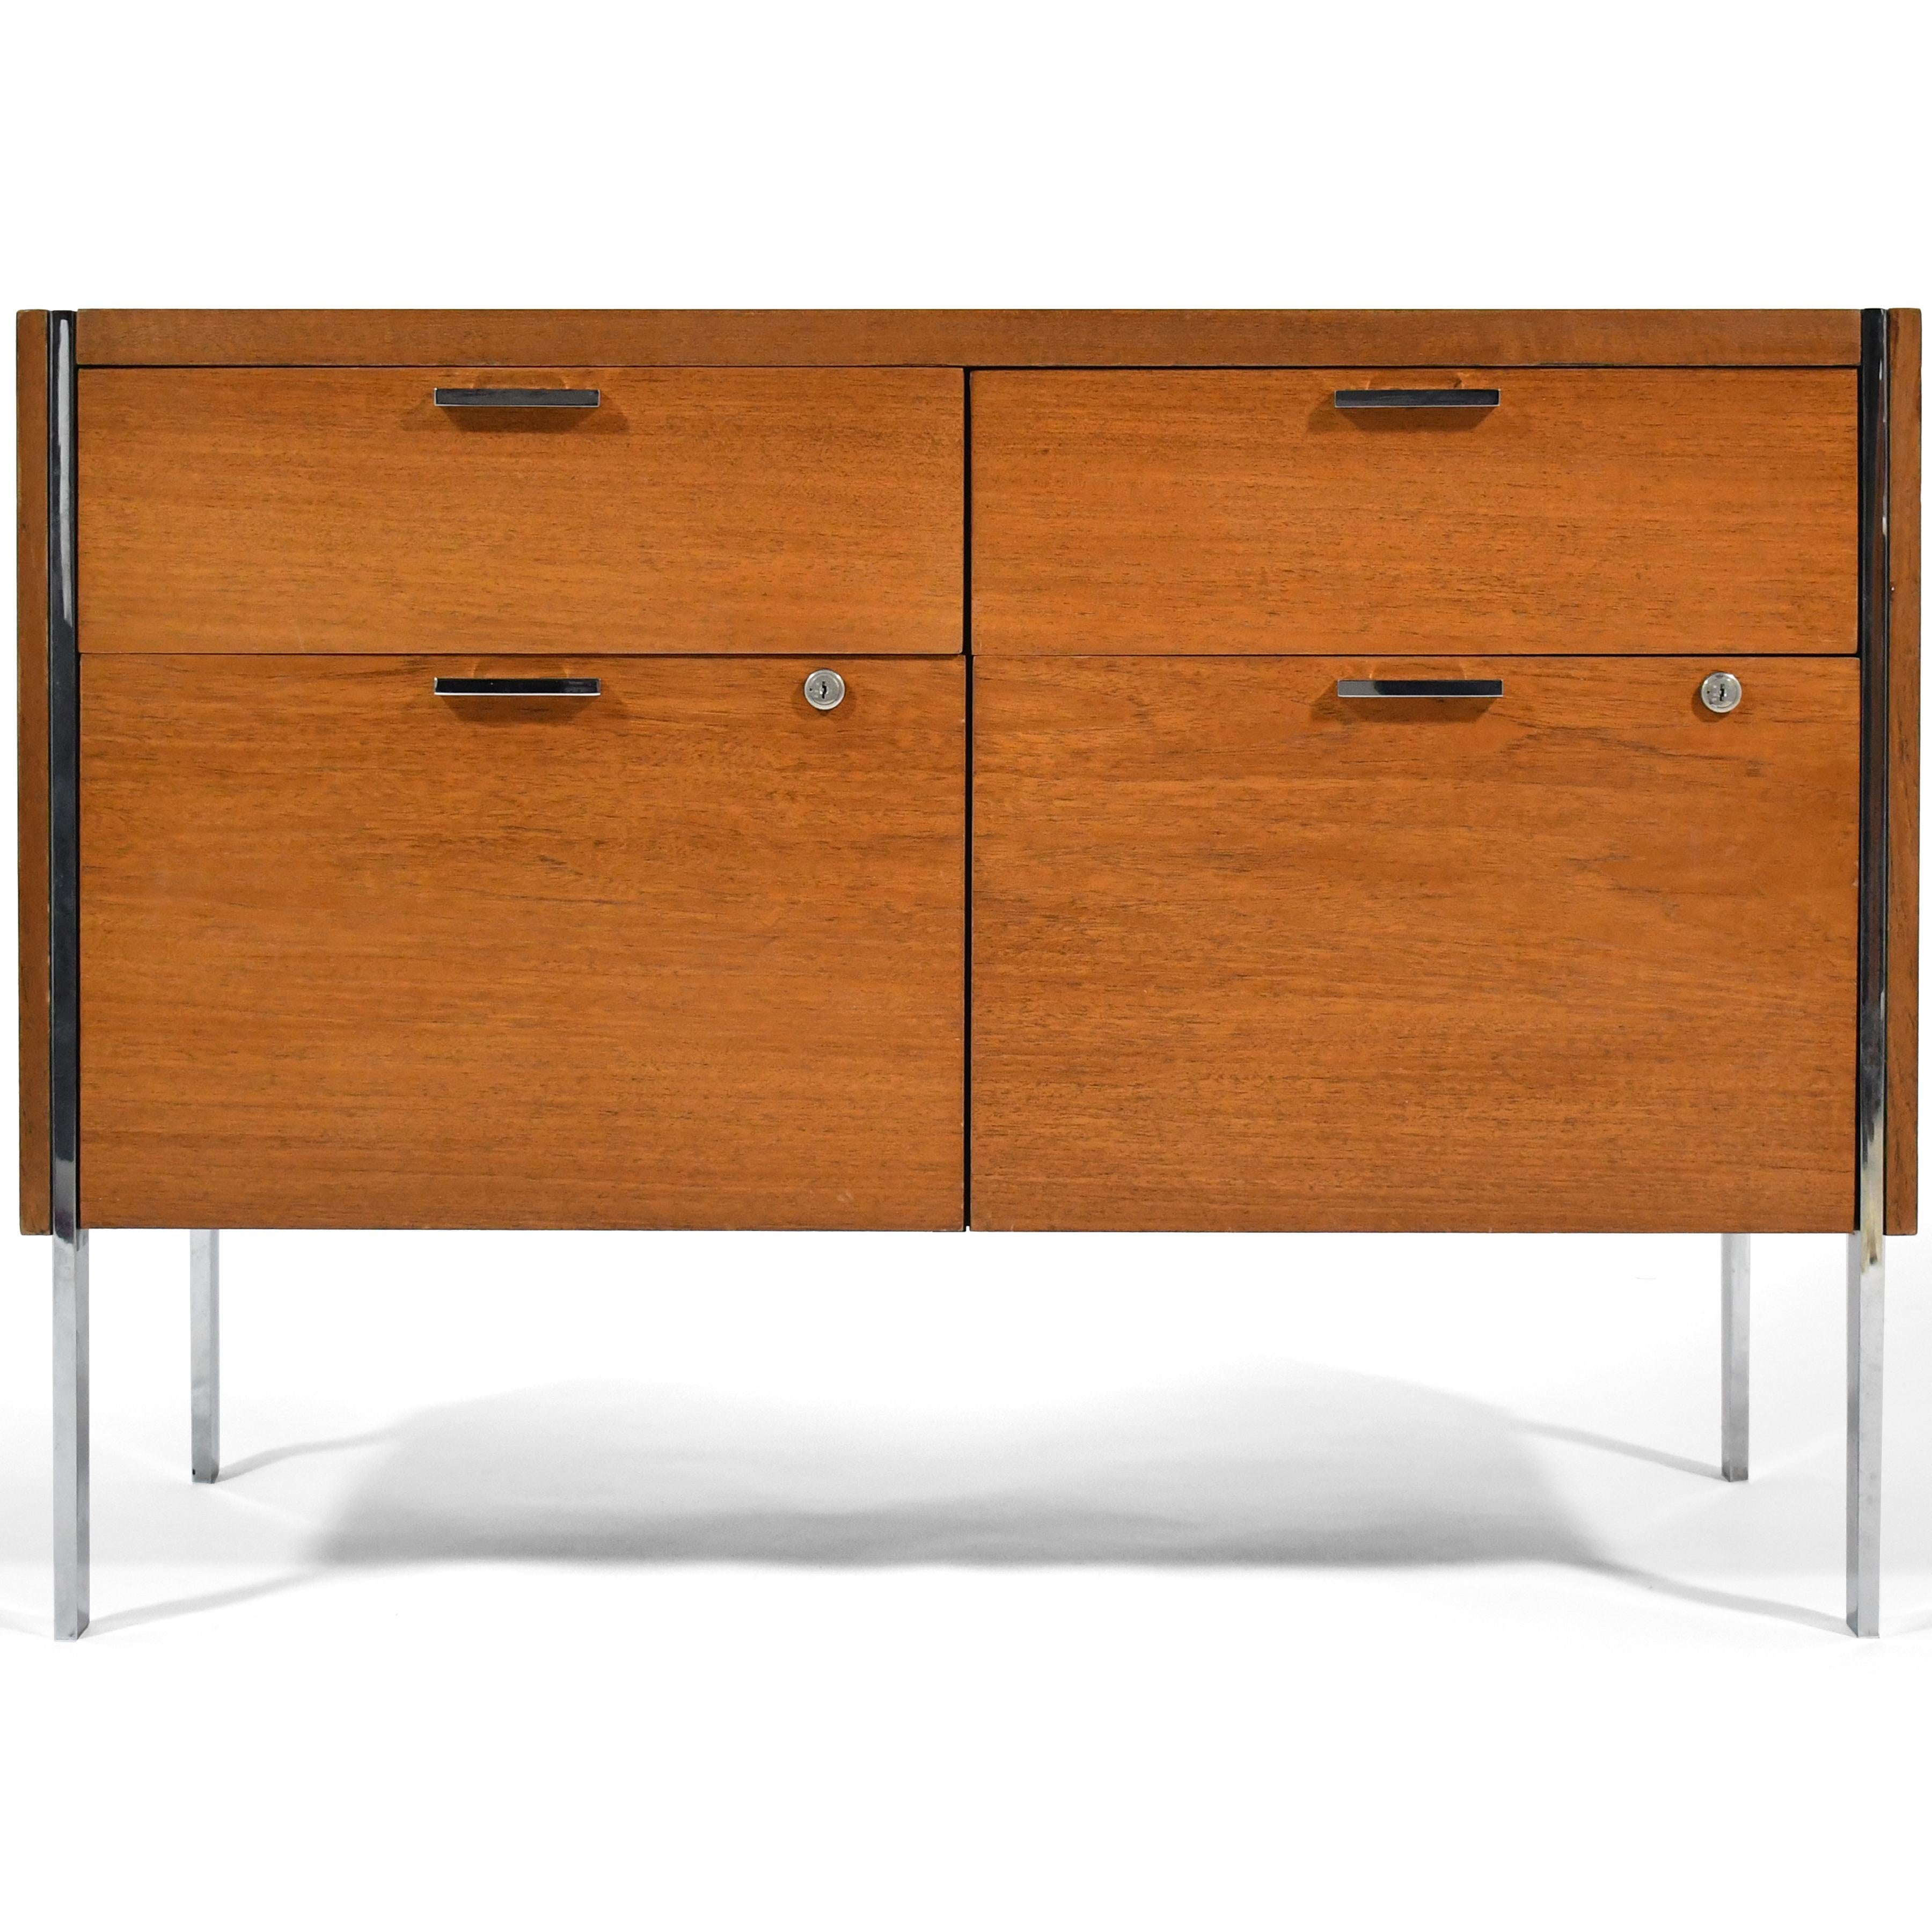 This handsome credenza by Stow Davis is extremely well built and chock full of pleasing details including flat stock legs that go through the teak case and the slender chrome pulls. It has two shallow drawers over two deep drawers.


28.75